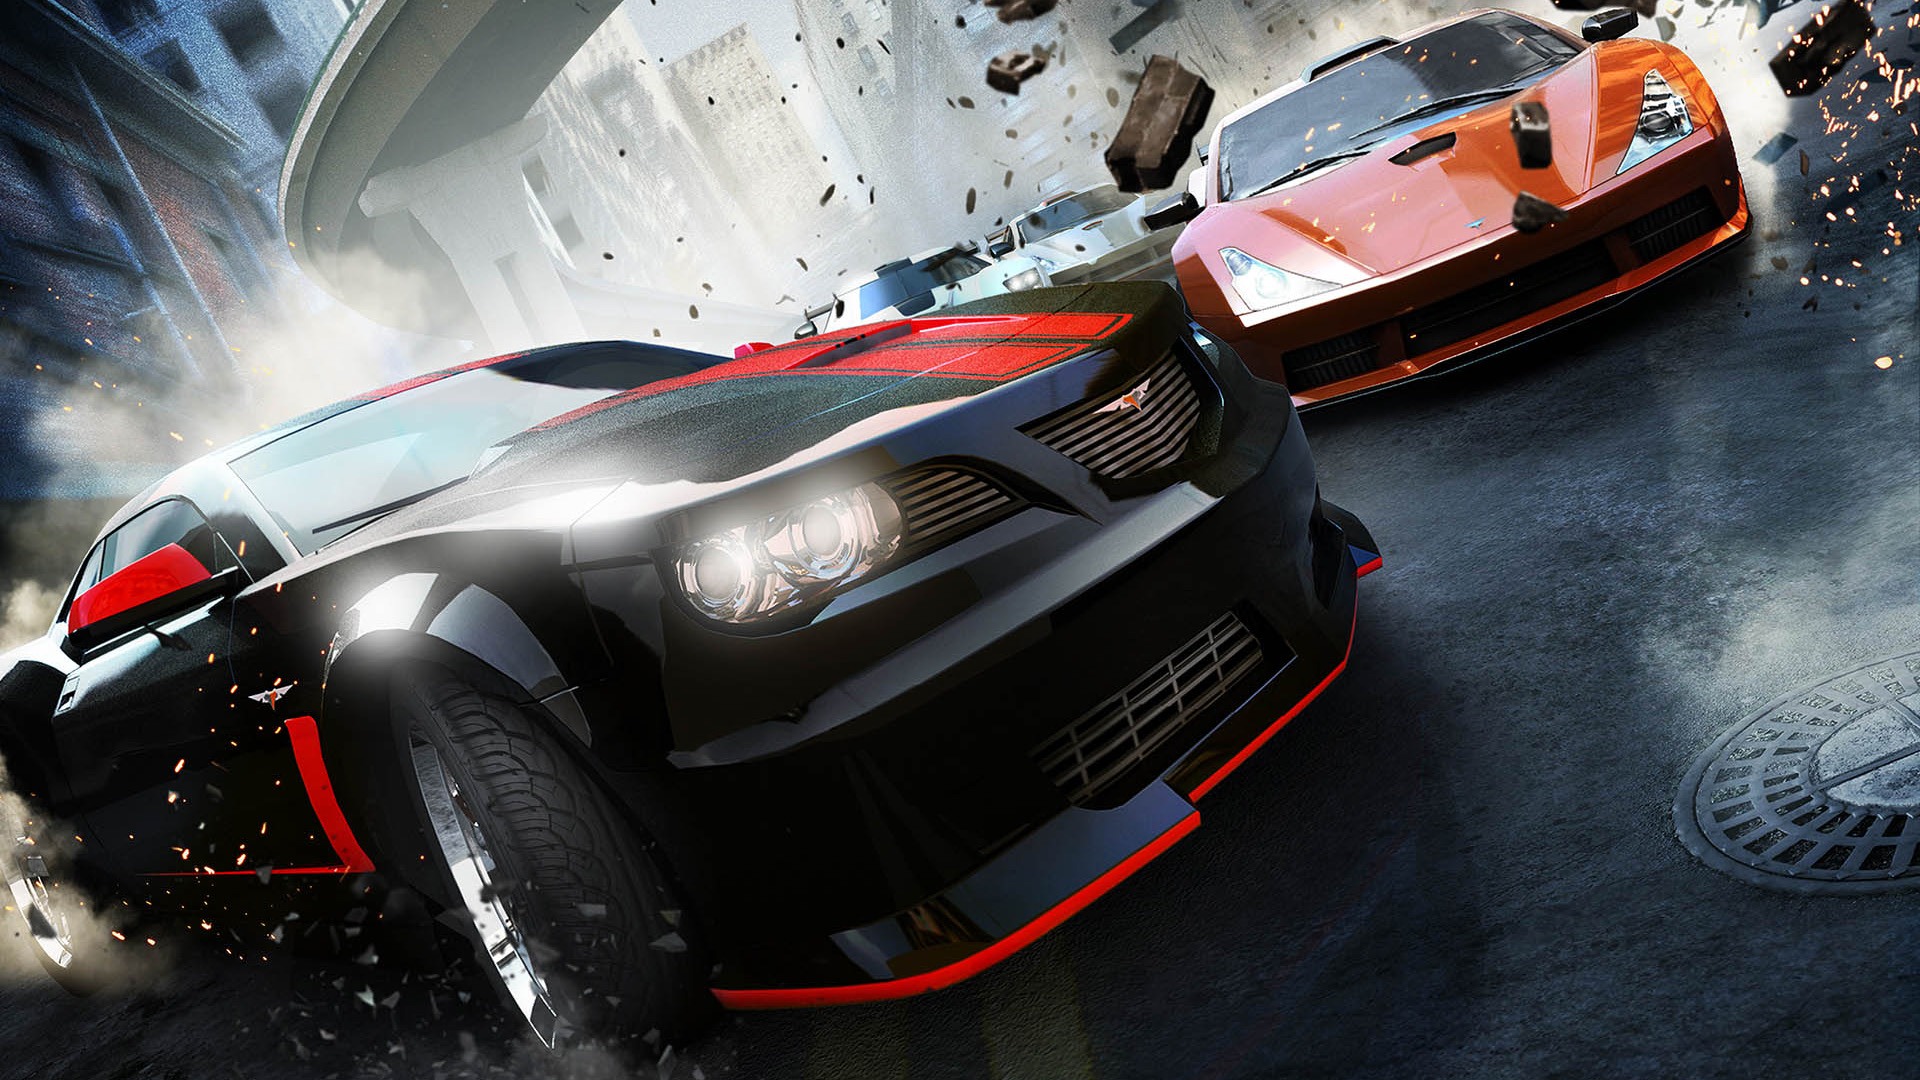 Ridge Racer Unbounded HD wallpapers #9 - 1920x1080